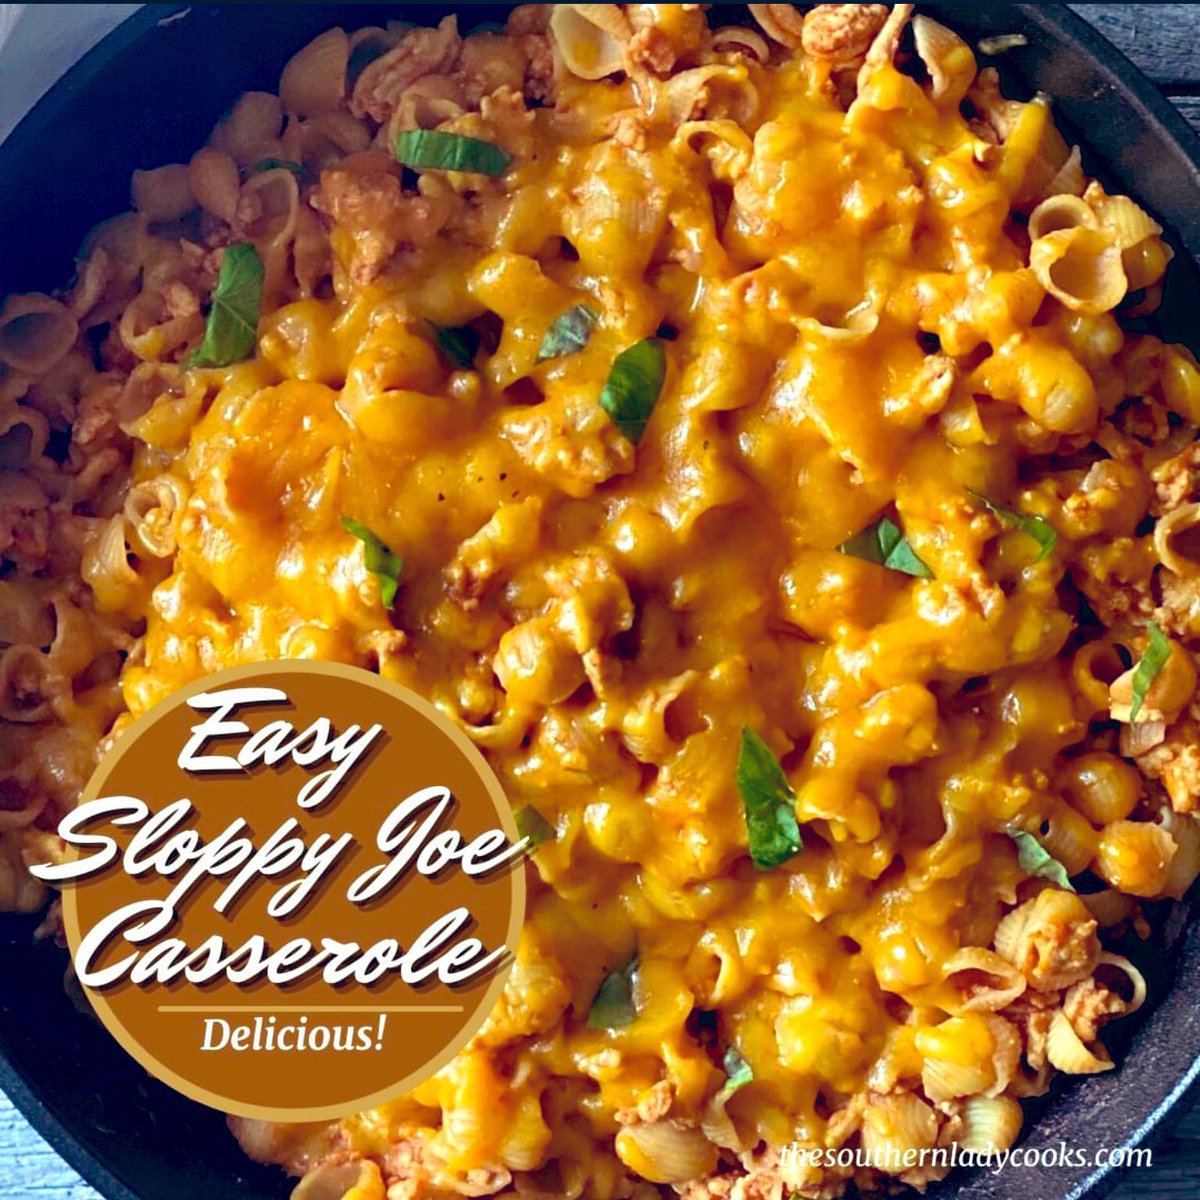 ➡ thesouthernladycooks.com/sloppy-joe-pas… Sloppy joe #pasta casserole. #dinner Comment from website: 'My family raved about this dish! It is so easy to make! I have made it twice, once with ground turkey and once with ground beef. Both were wonderful.' - Janelle